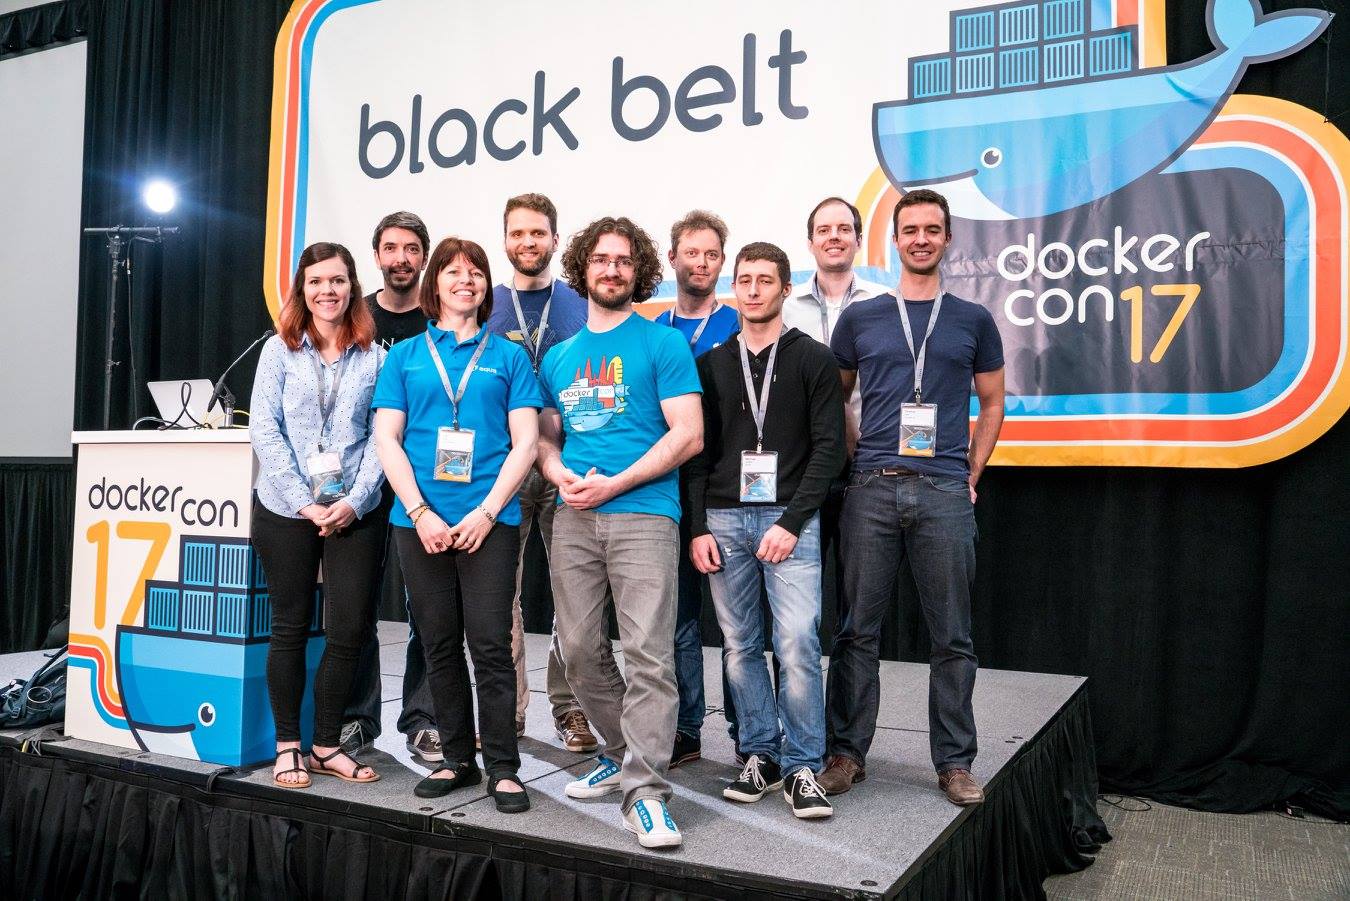 Group picture with the Black Belt Track speaker at DockerCon 2017 in Austin.